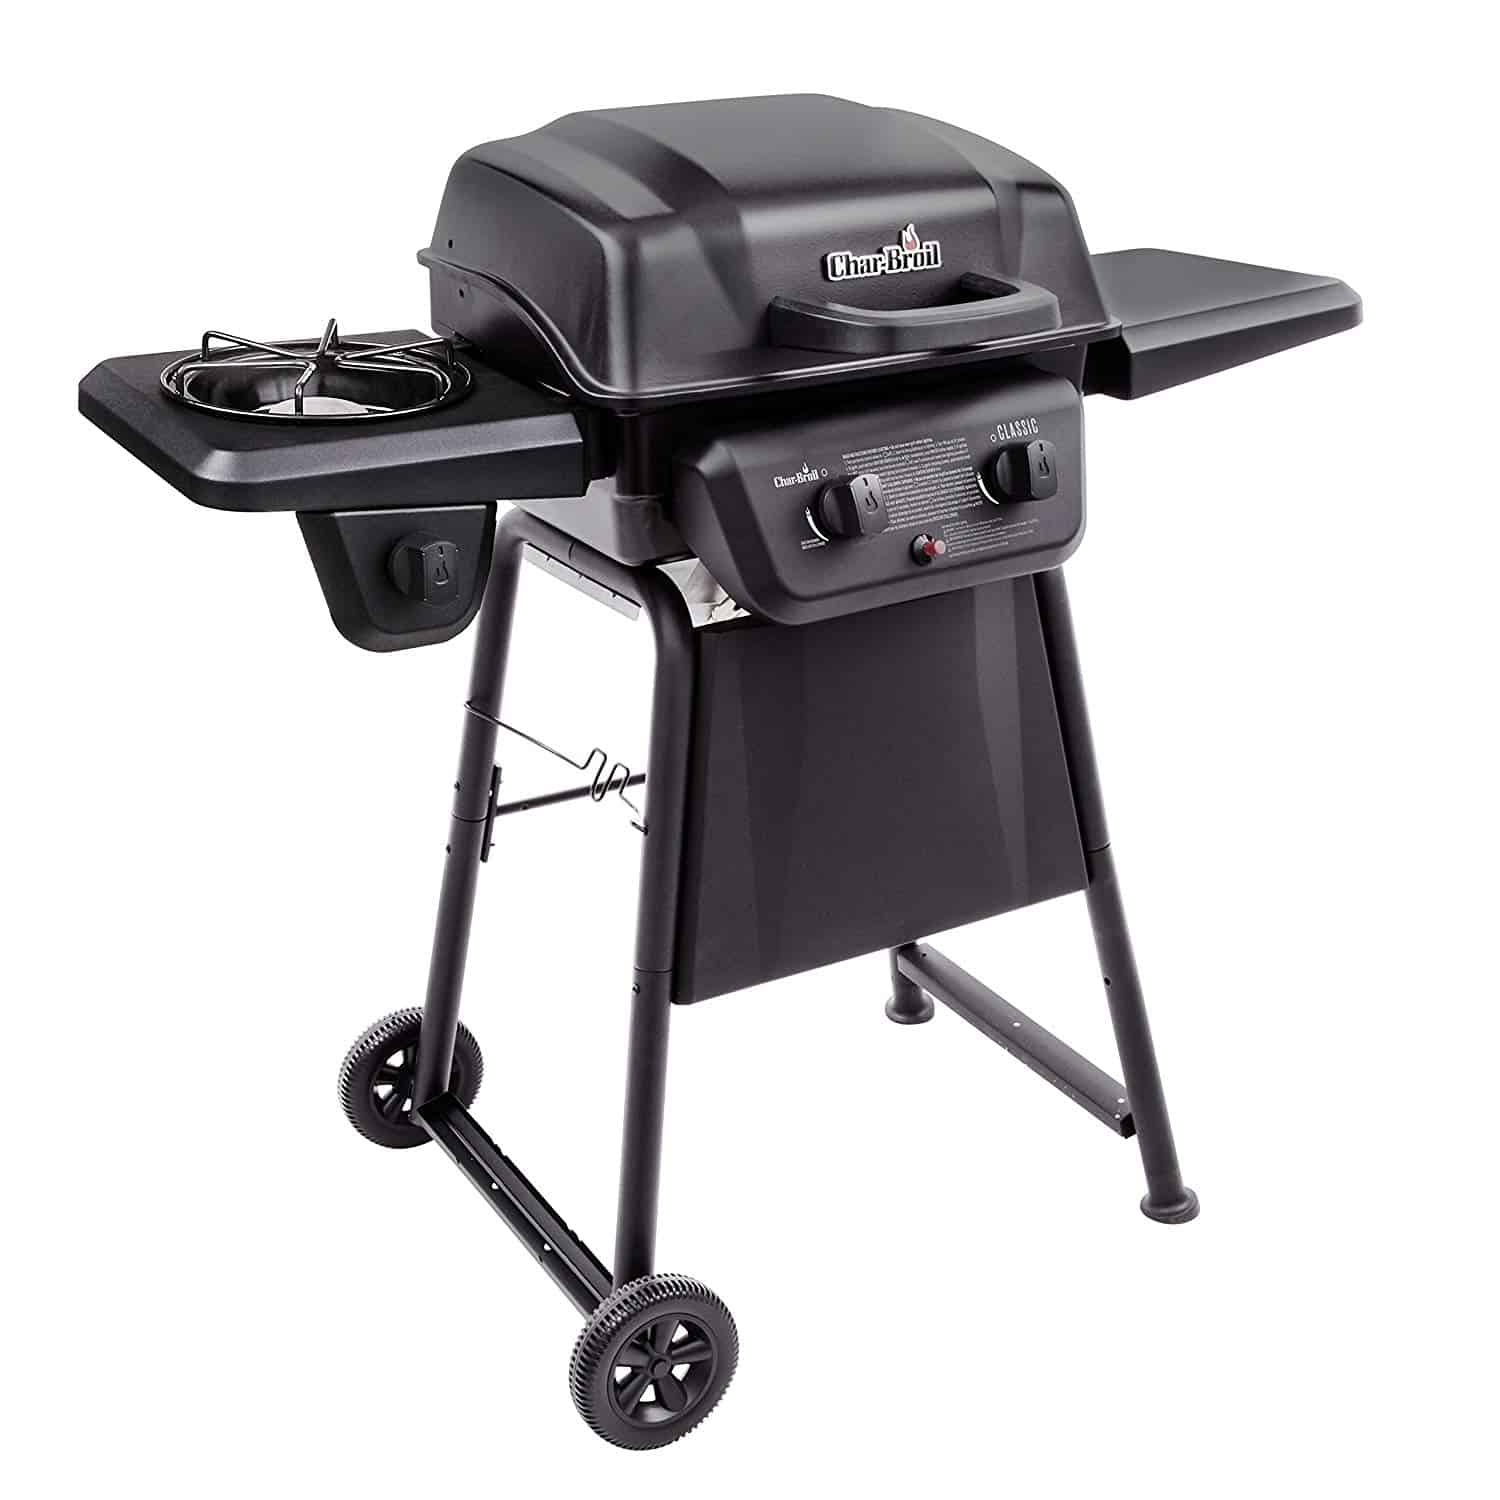 Charbroil classic grill